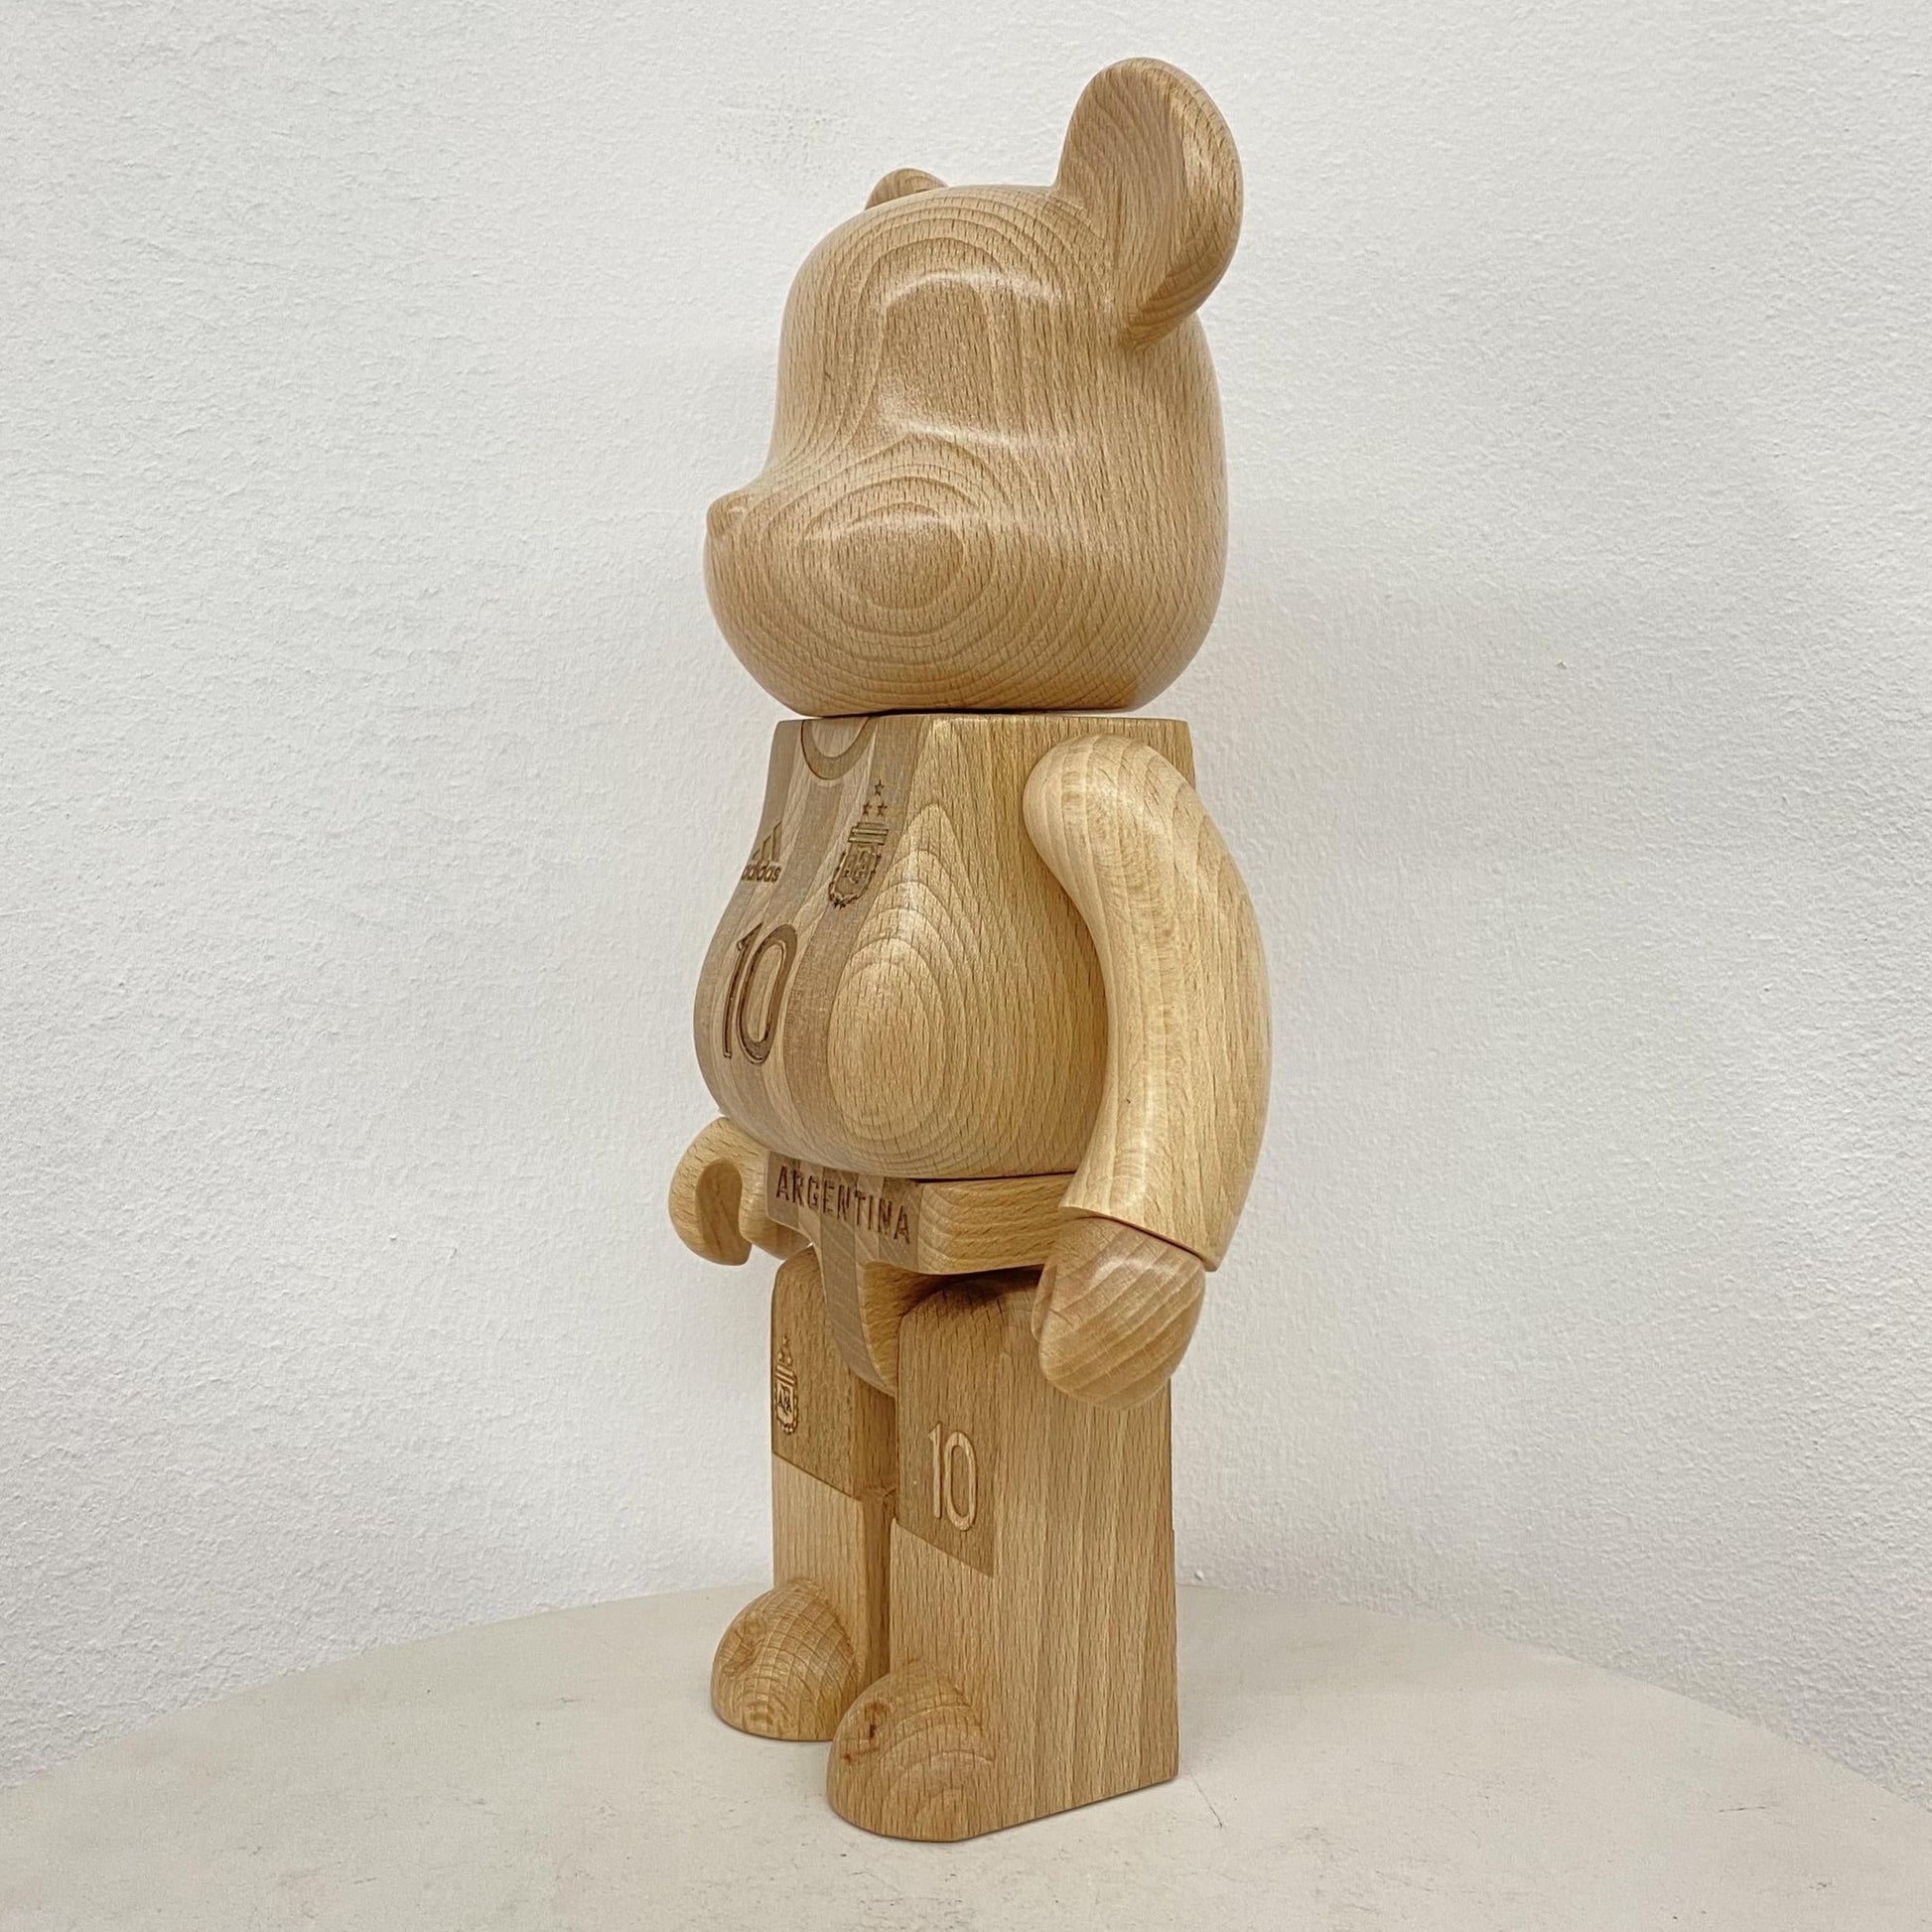 28cm 400% Bearbrick Messi Wooden Anime Action Figure With Wooden Box-FuGui Tide play